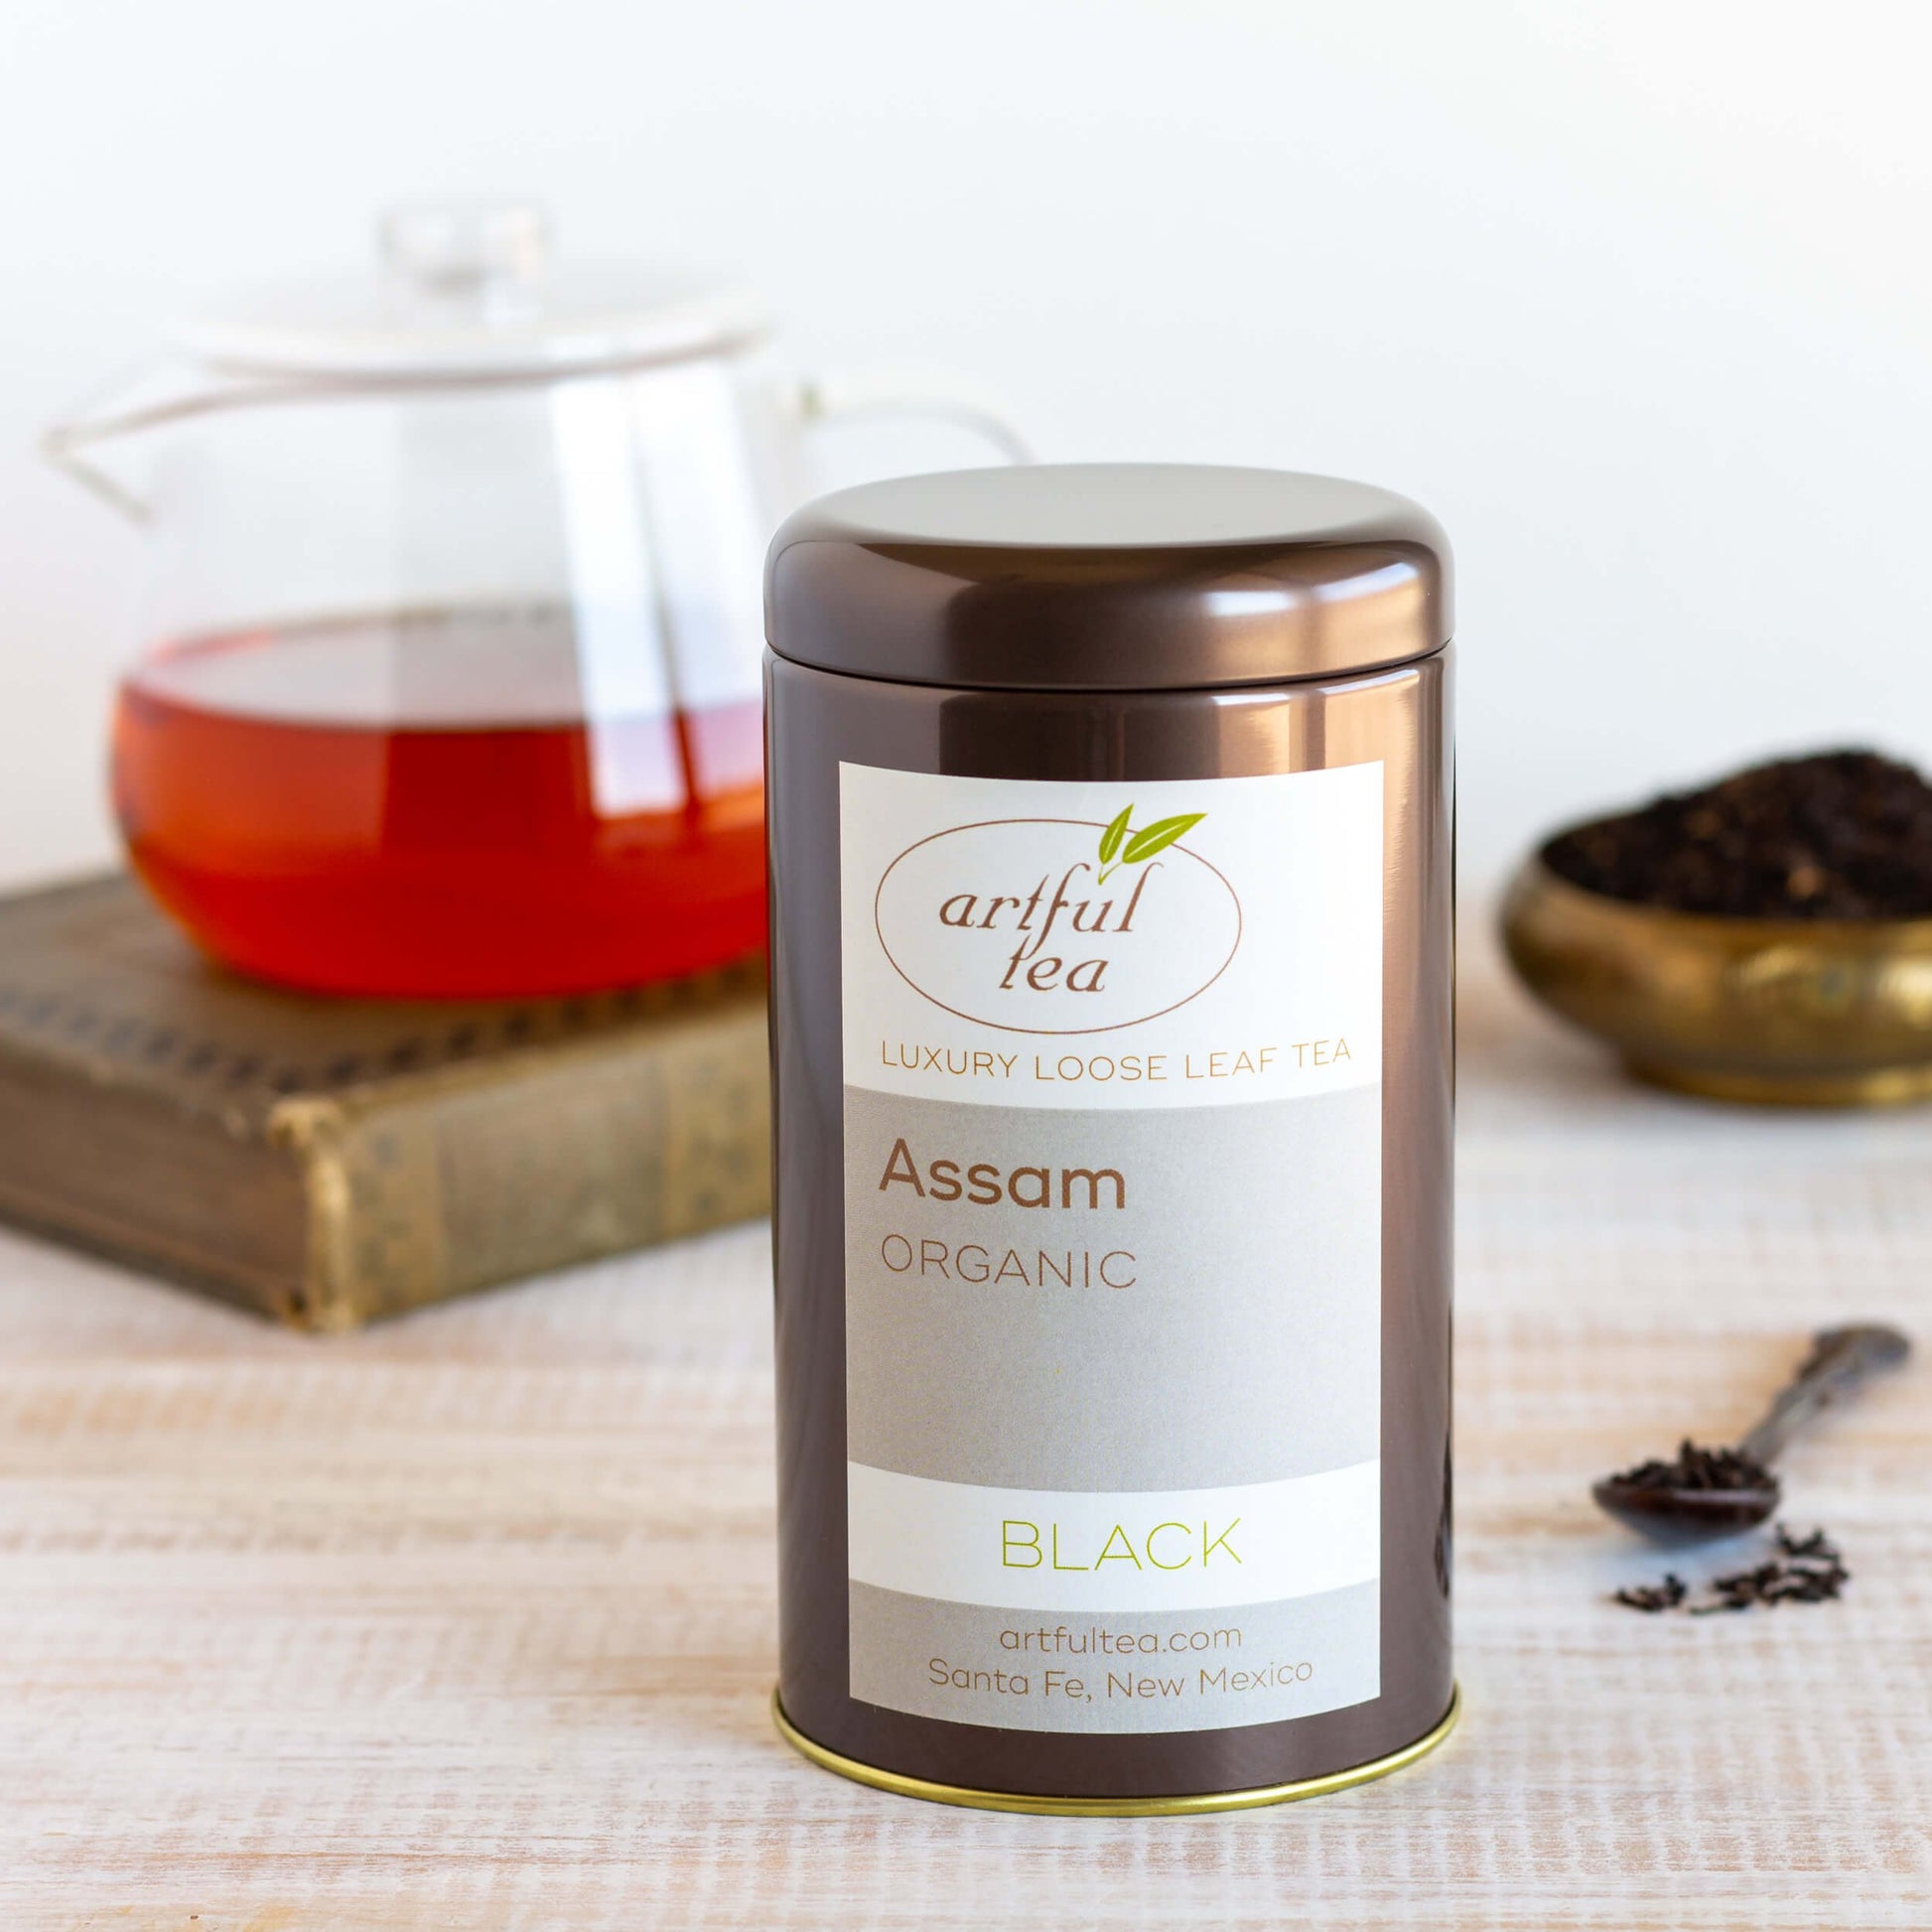 Organic Assam Black Tea shown packaged in a brown tin, with teapot and loose tea in background